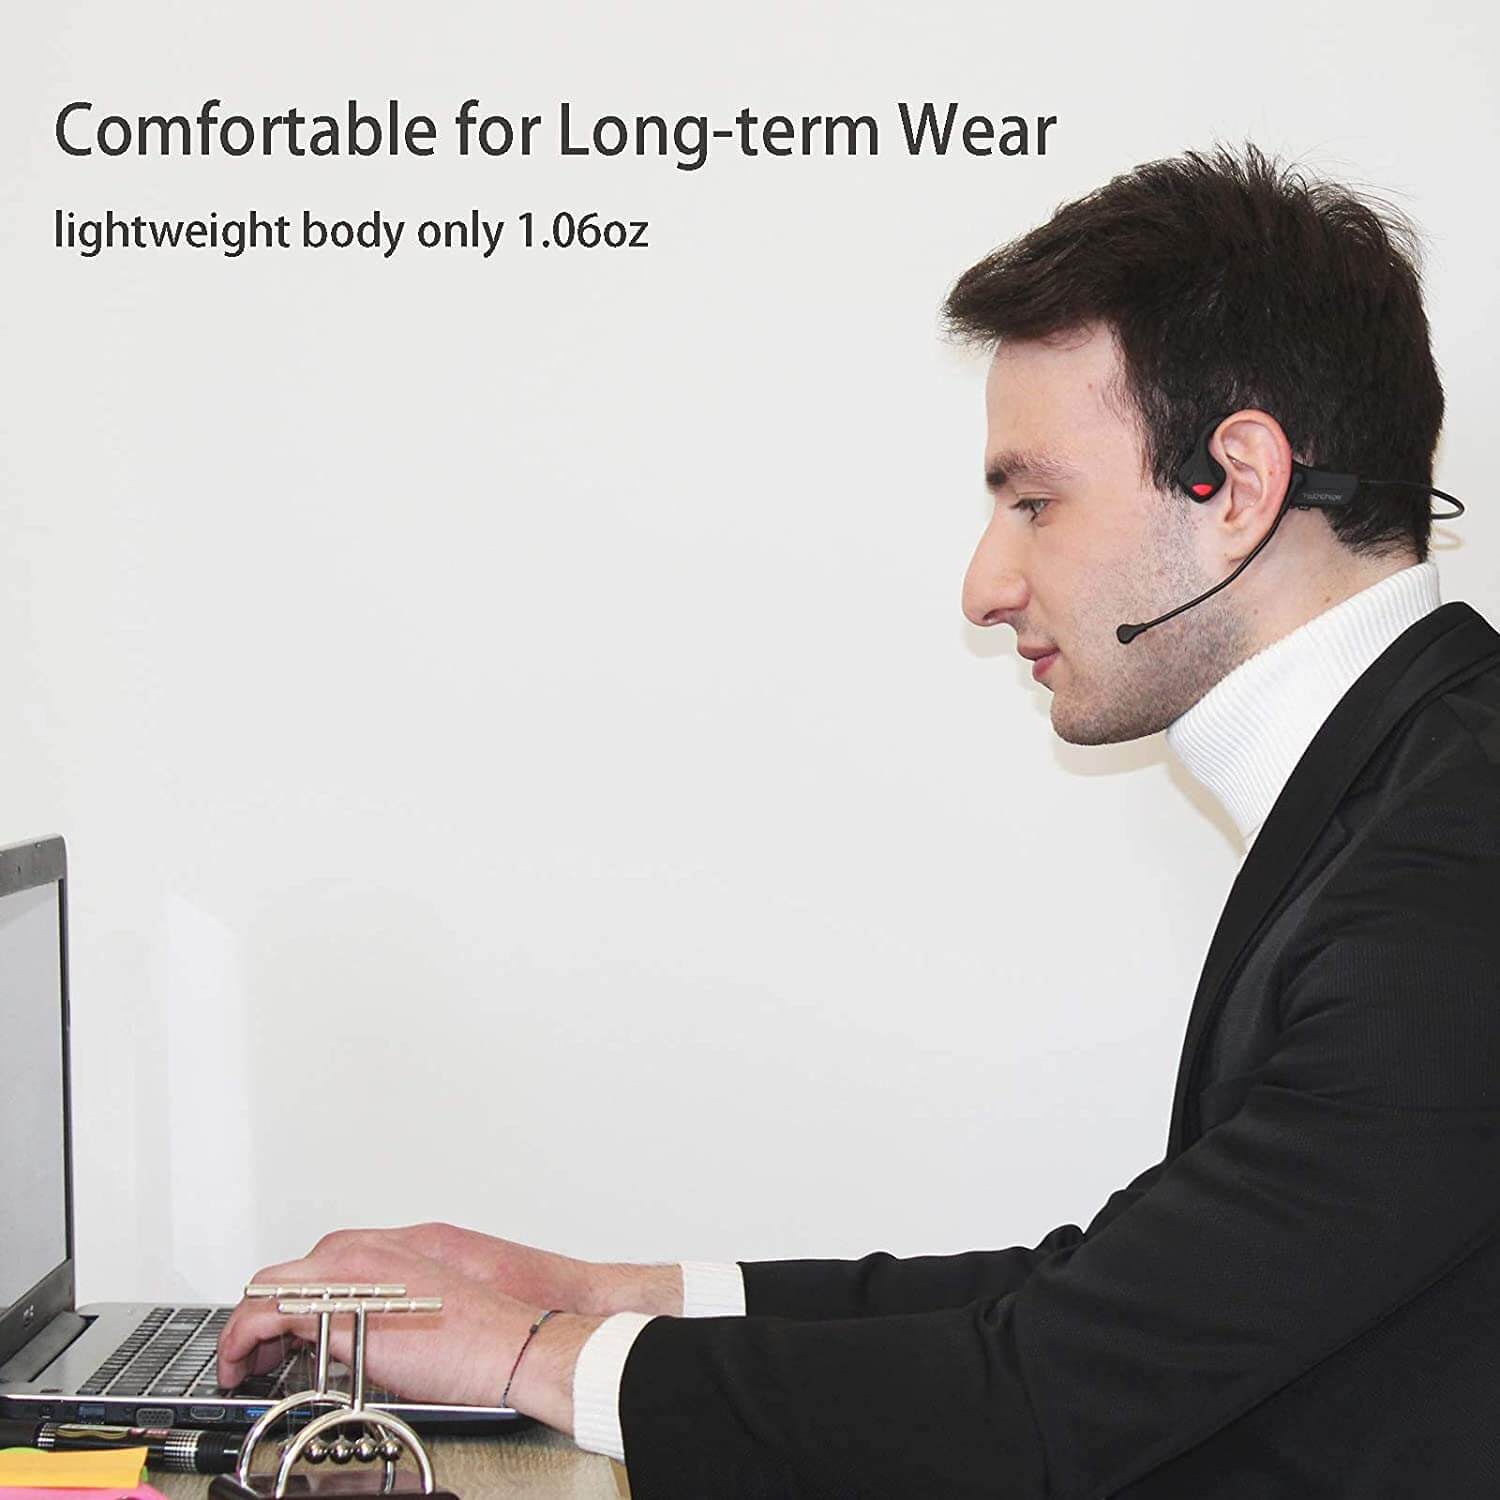 A focused individual uses wireless bone conduction headphones for a comfortable and productive work session.